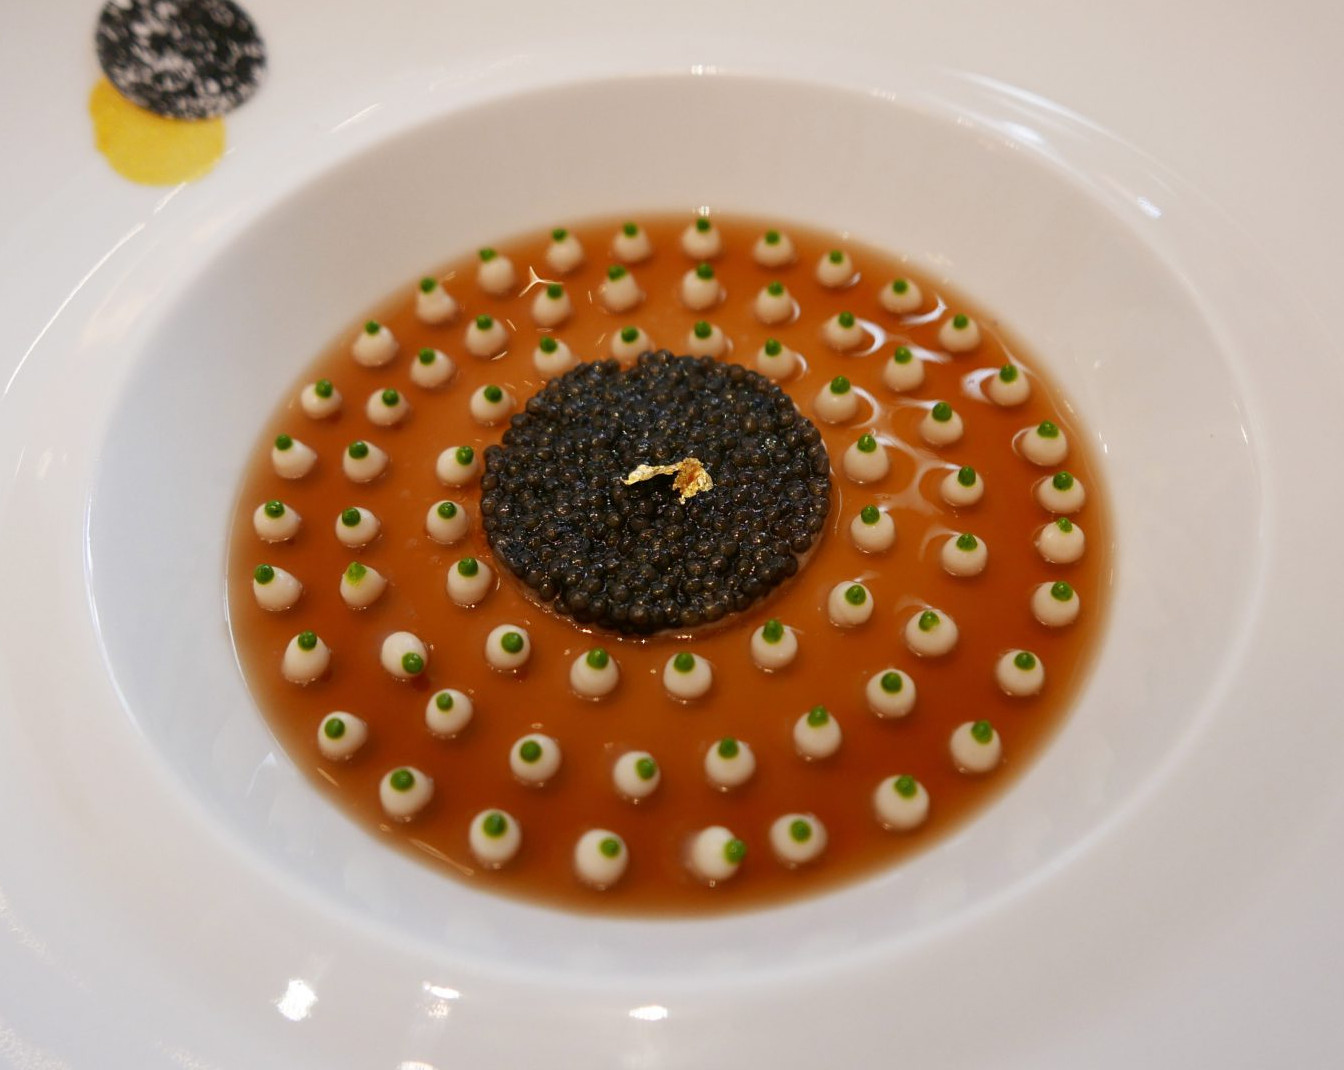 Caviar surprise on spider crab and coral anise infusion by Robuchon